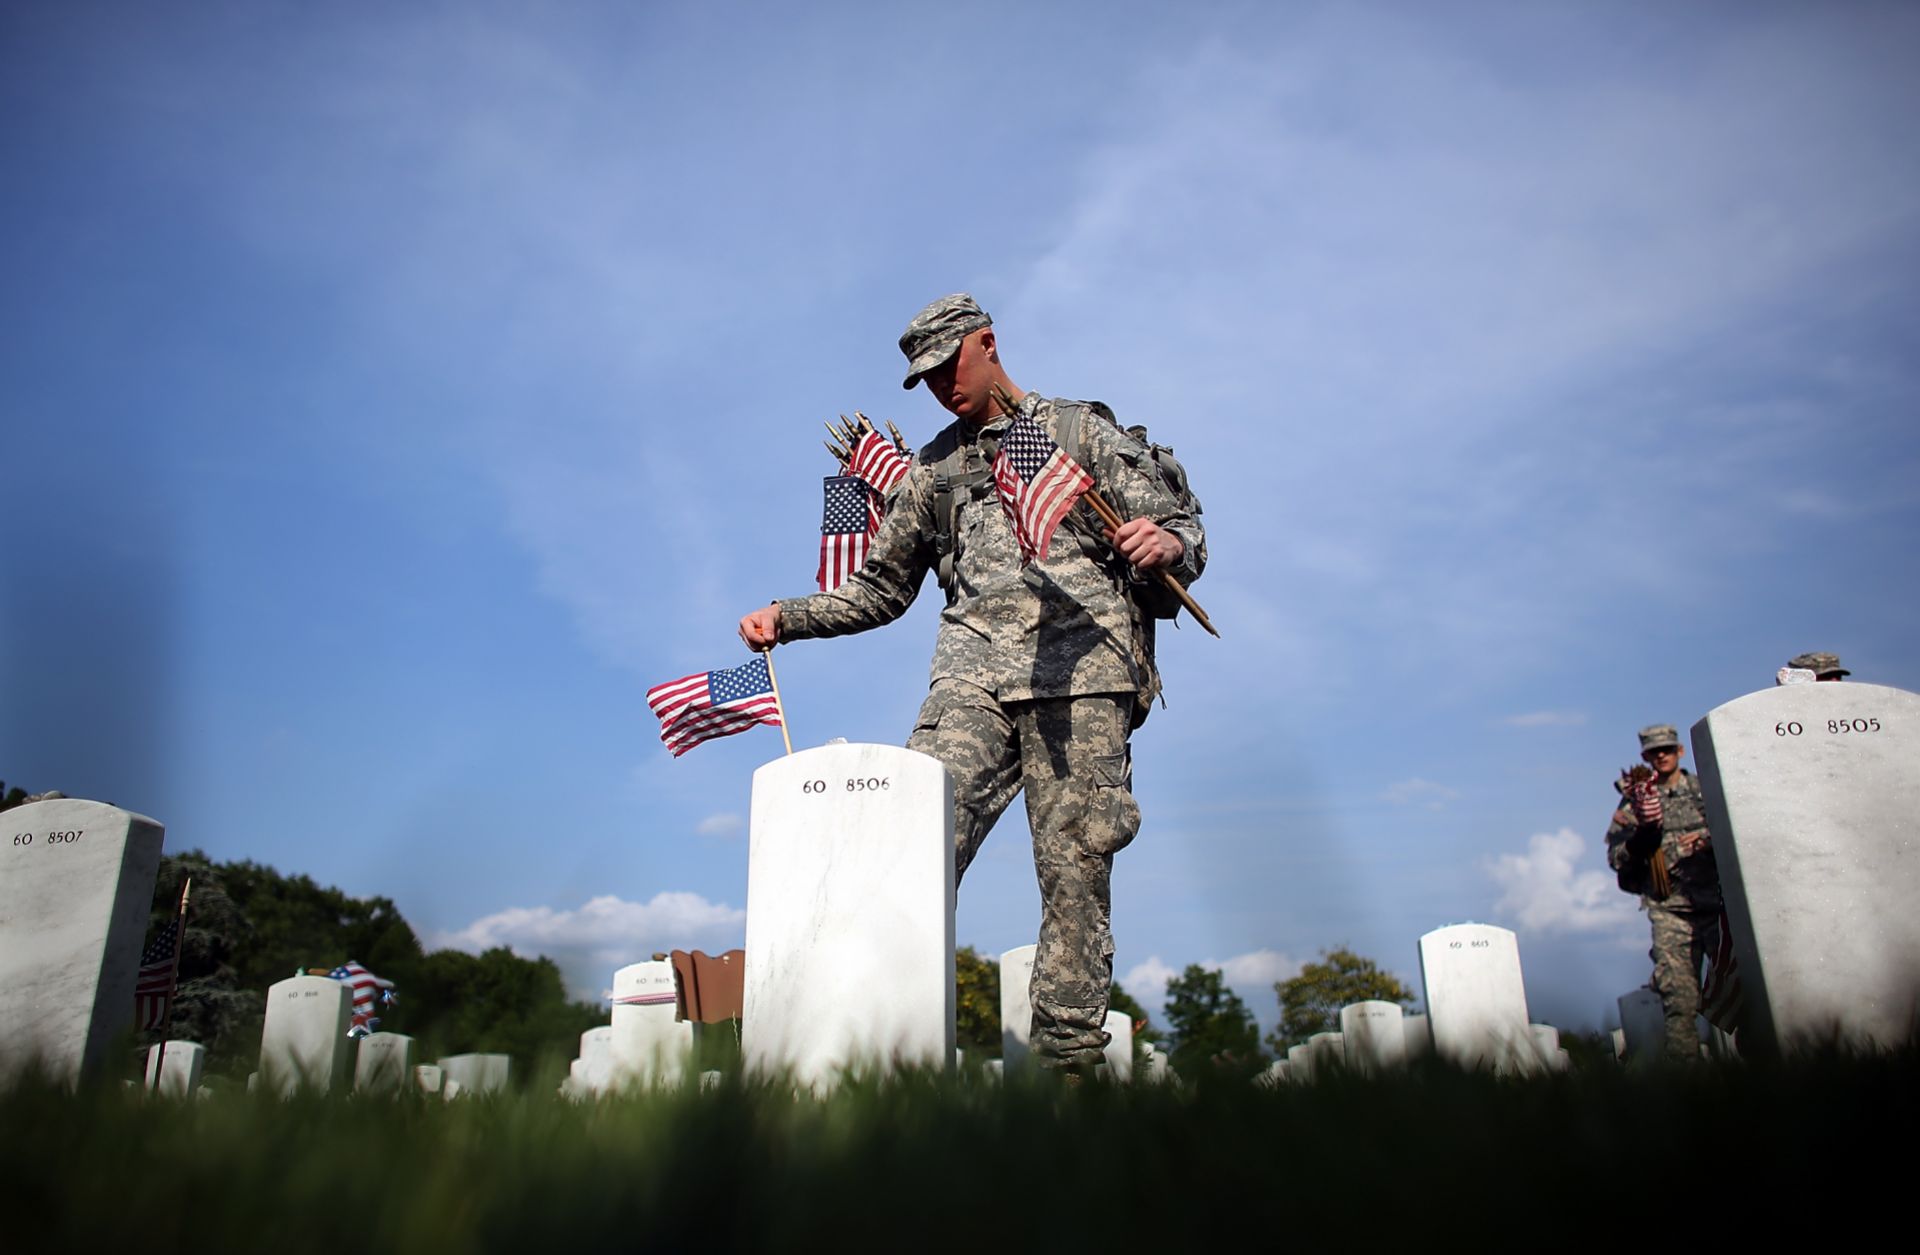 A soldier places flags at the gravesites of U.S. military members buried at the Arlington National Cemetery in Virginia on May 24, 2012. 